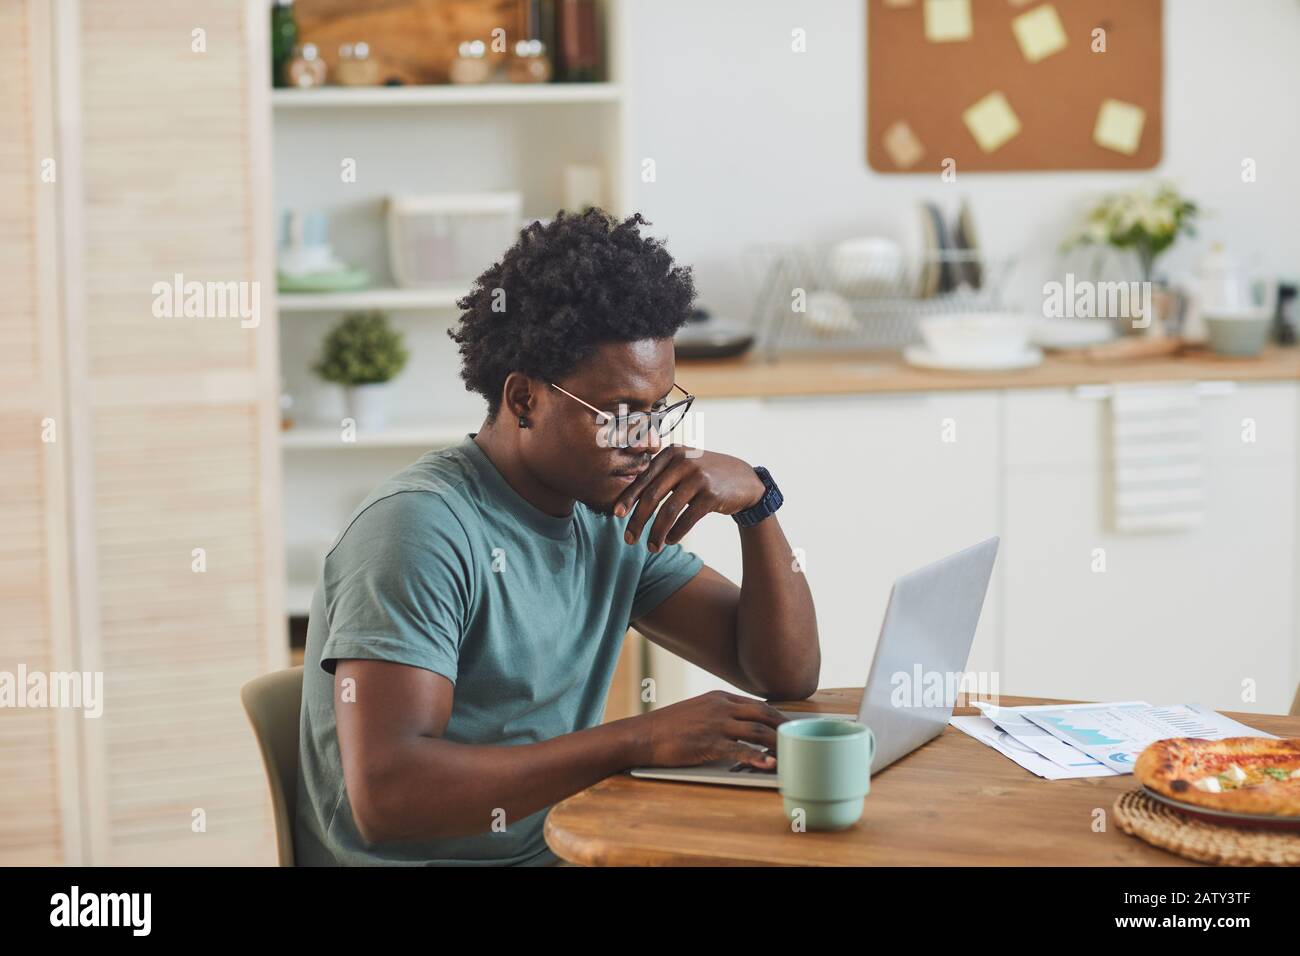 African young man sitting at the table and working on laptop in the kitchen at home Stock Photo